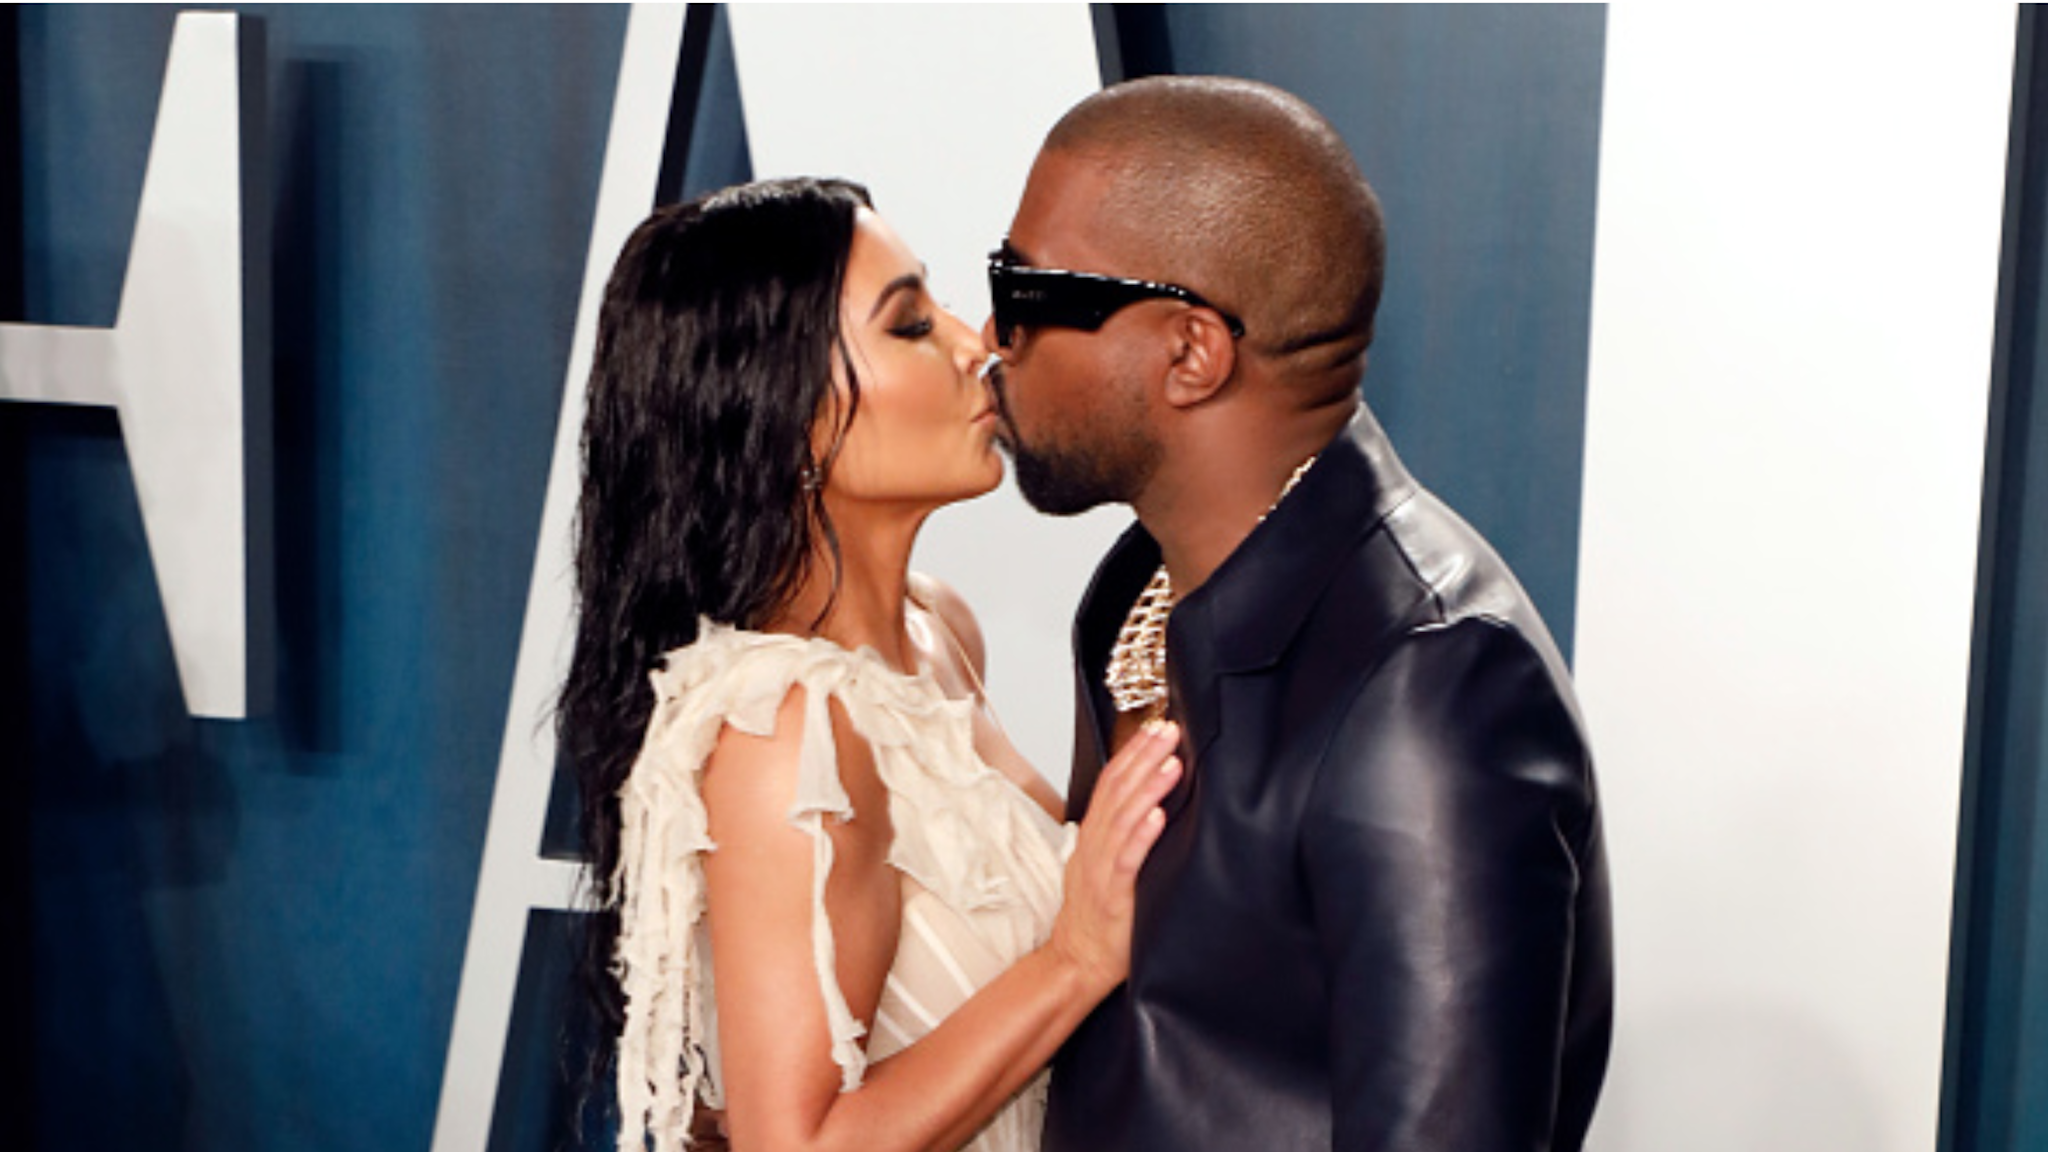 BEVERLY HILLS, CALIFORNIA - FEBRUARY 09: Kim Kardashian West and Kanye West kiss at the 2020 Vanity Fair Oscar Party at Wallis Annenberg Center for the Performing Arts on February 09, 2020 in Beverly Hills, California.